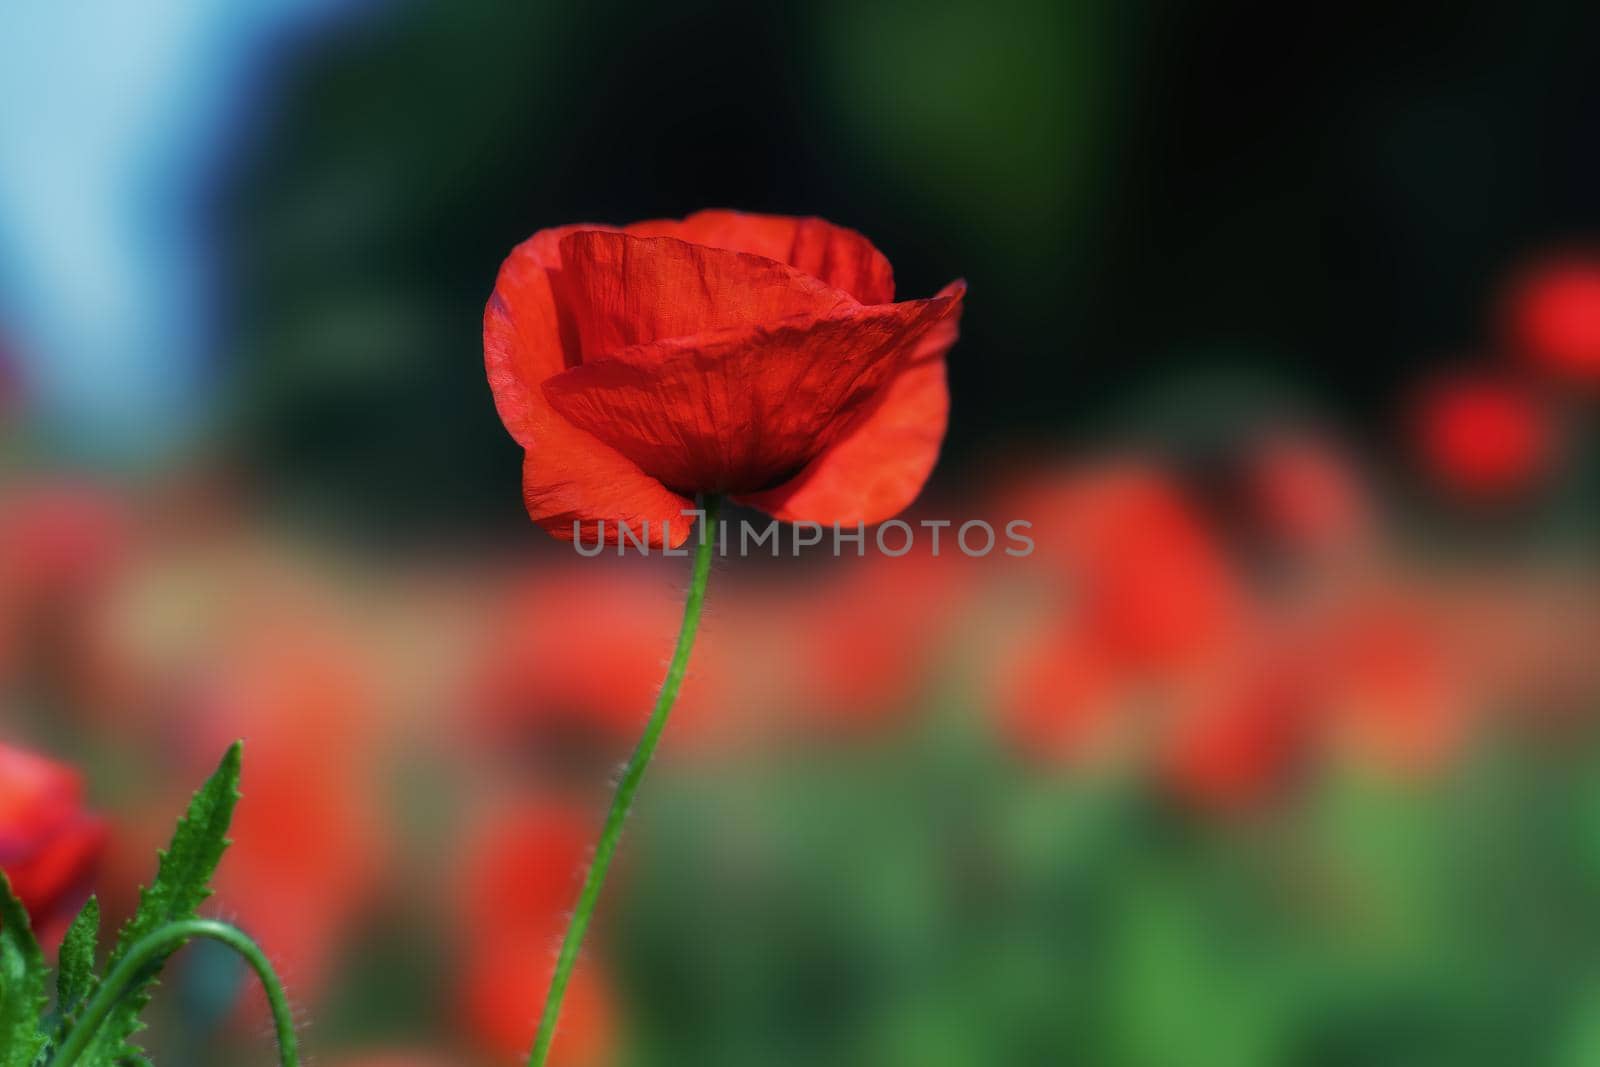 A glowing red poppy against a soft background